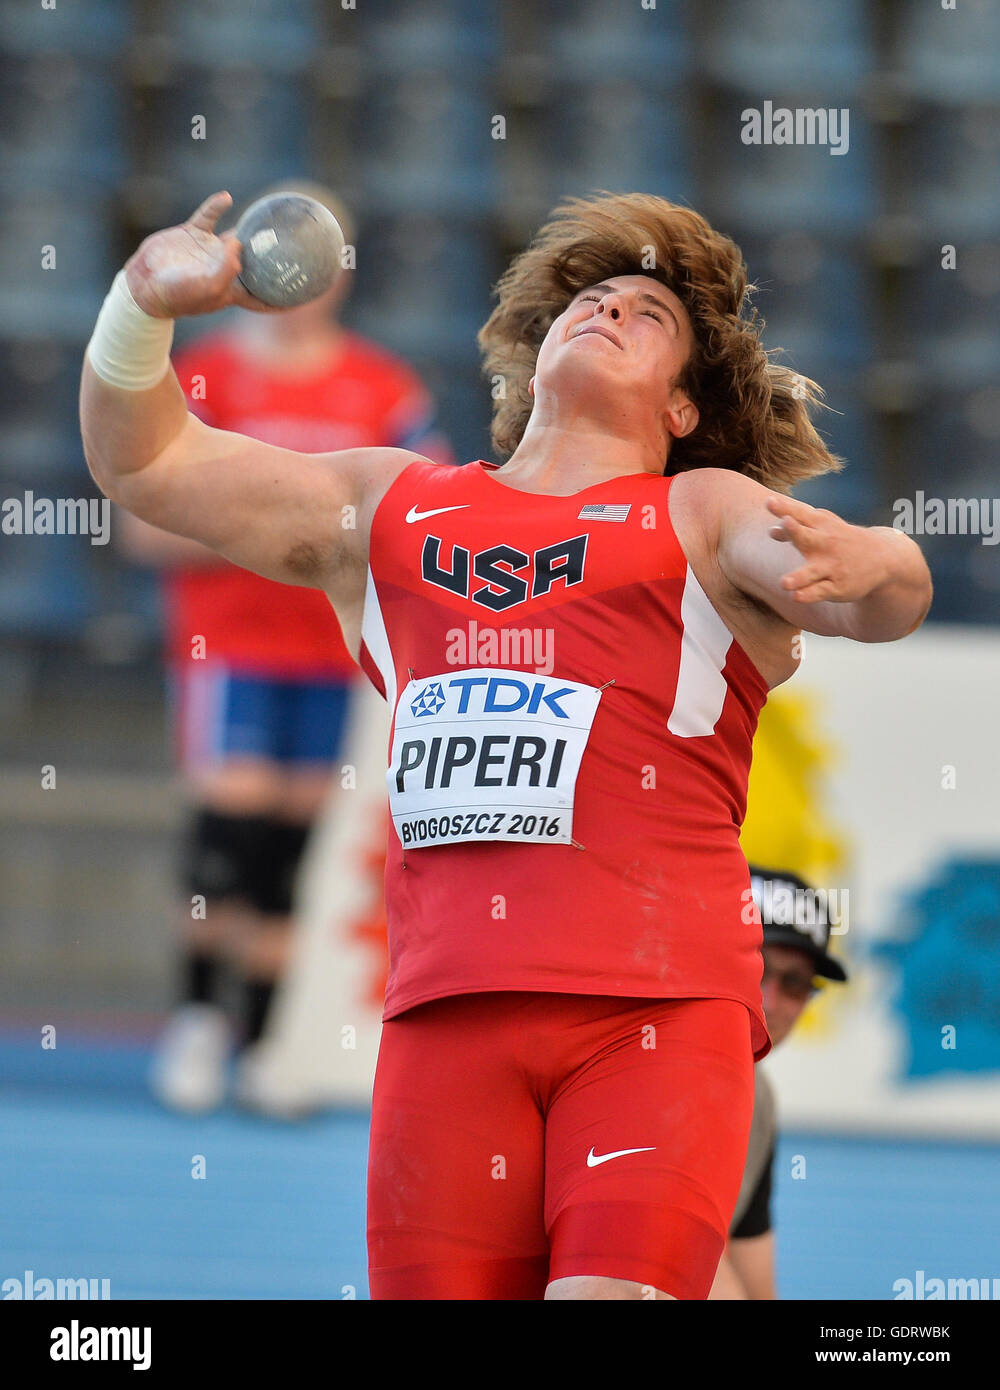 Bydgoszcz, Poland. 19th July, 2016. Adrian Piperi III of the USA in the final of the mens shot put during the afternoon session on day 1 of the IAAF World Junior Championships at Zawisza Stadium on July 19, 2016 in Bydgoszcz, Poland. Credit:  Roger Sedres/Alamy Live News Stock Photo